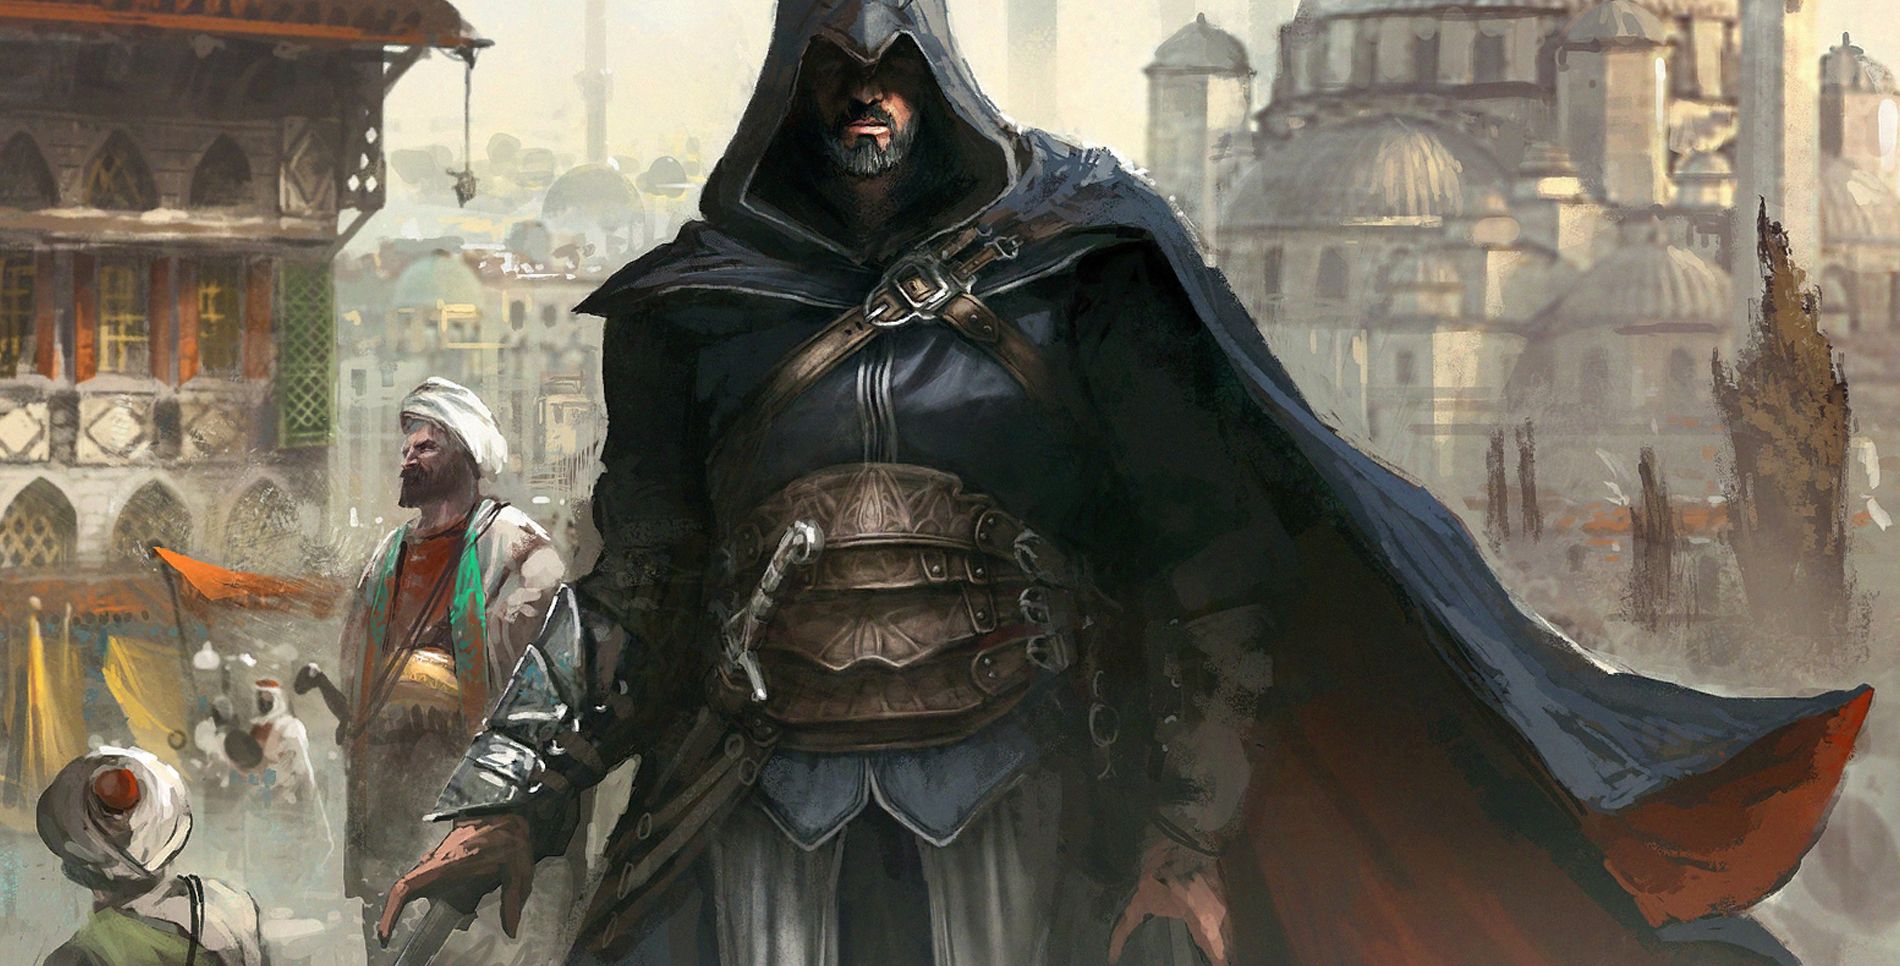 Assassins Creed 10 Cities We Need To See Next (And 10 That Should Be Avoided)